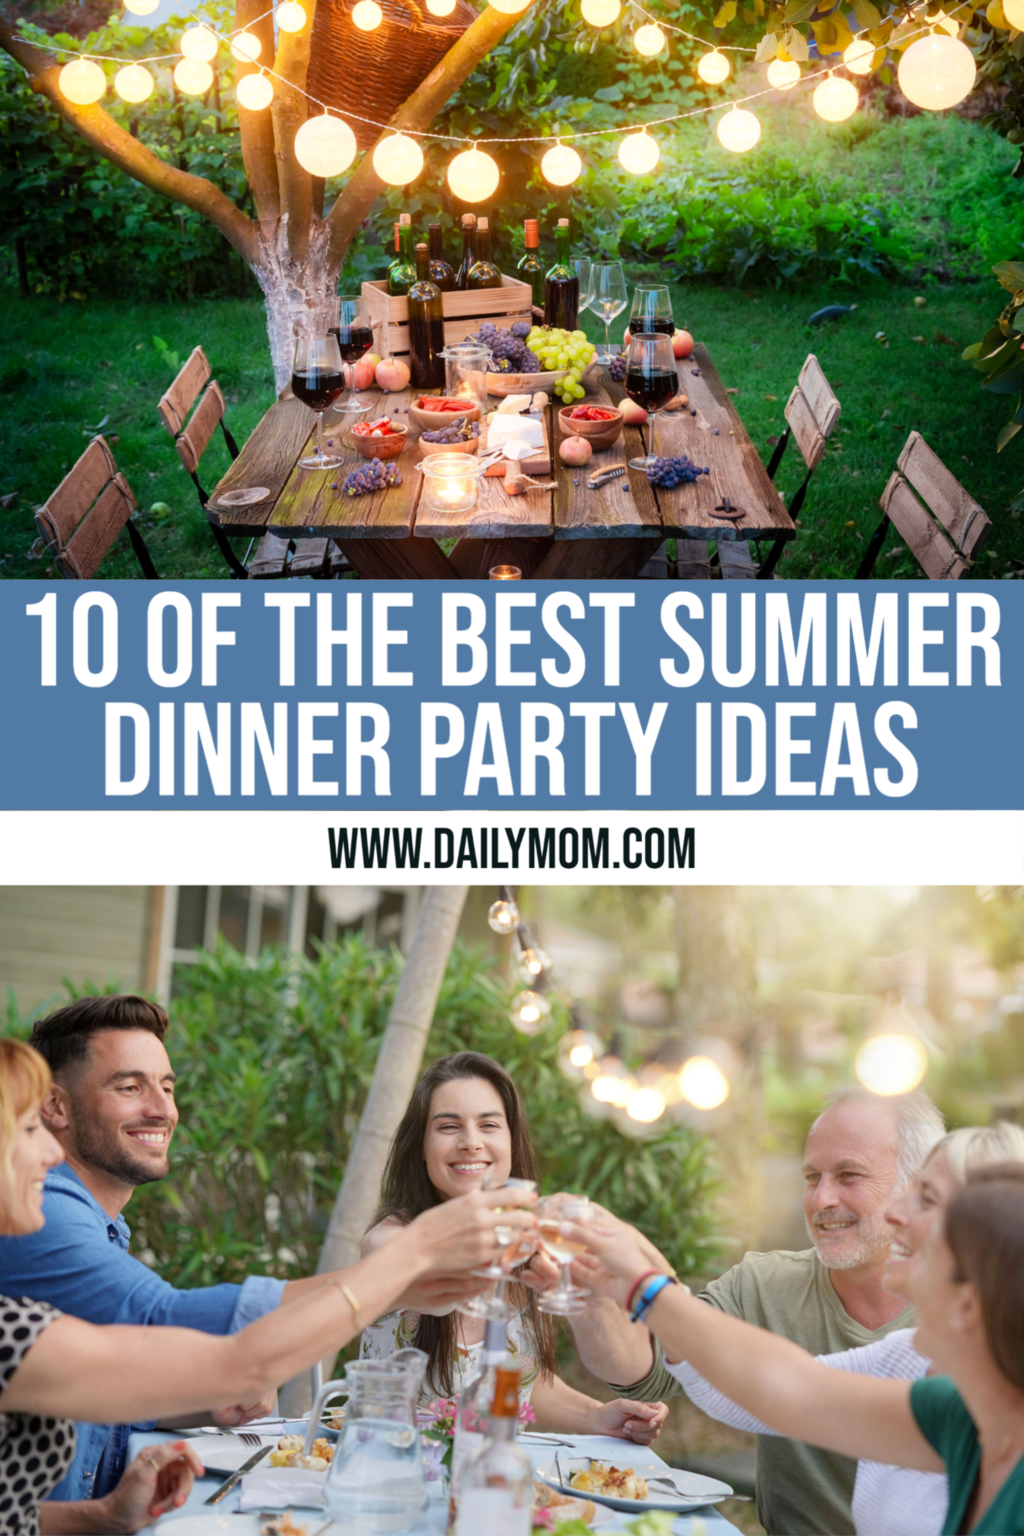 10 Summer Dinner Party Ideas For Warm Nights